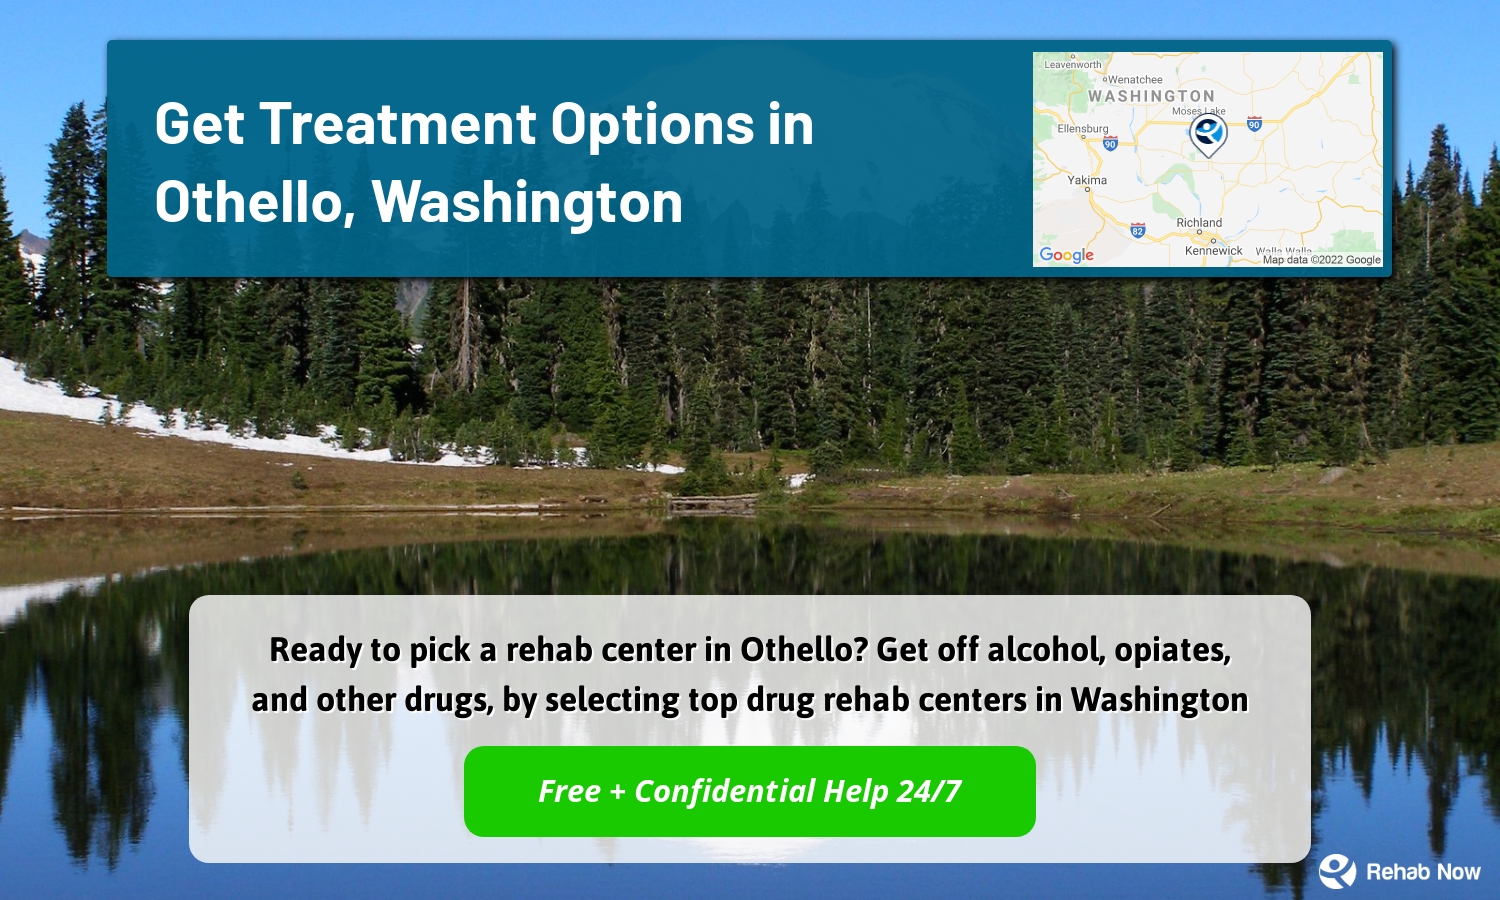 Ready to pick a rehab center in Othello? Get off alcohol, opiates, and other drugs, by selecting top drug rehab centers in Washington